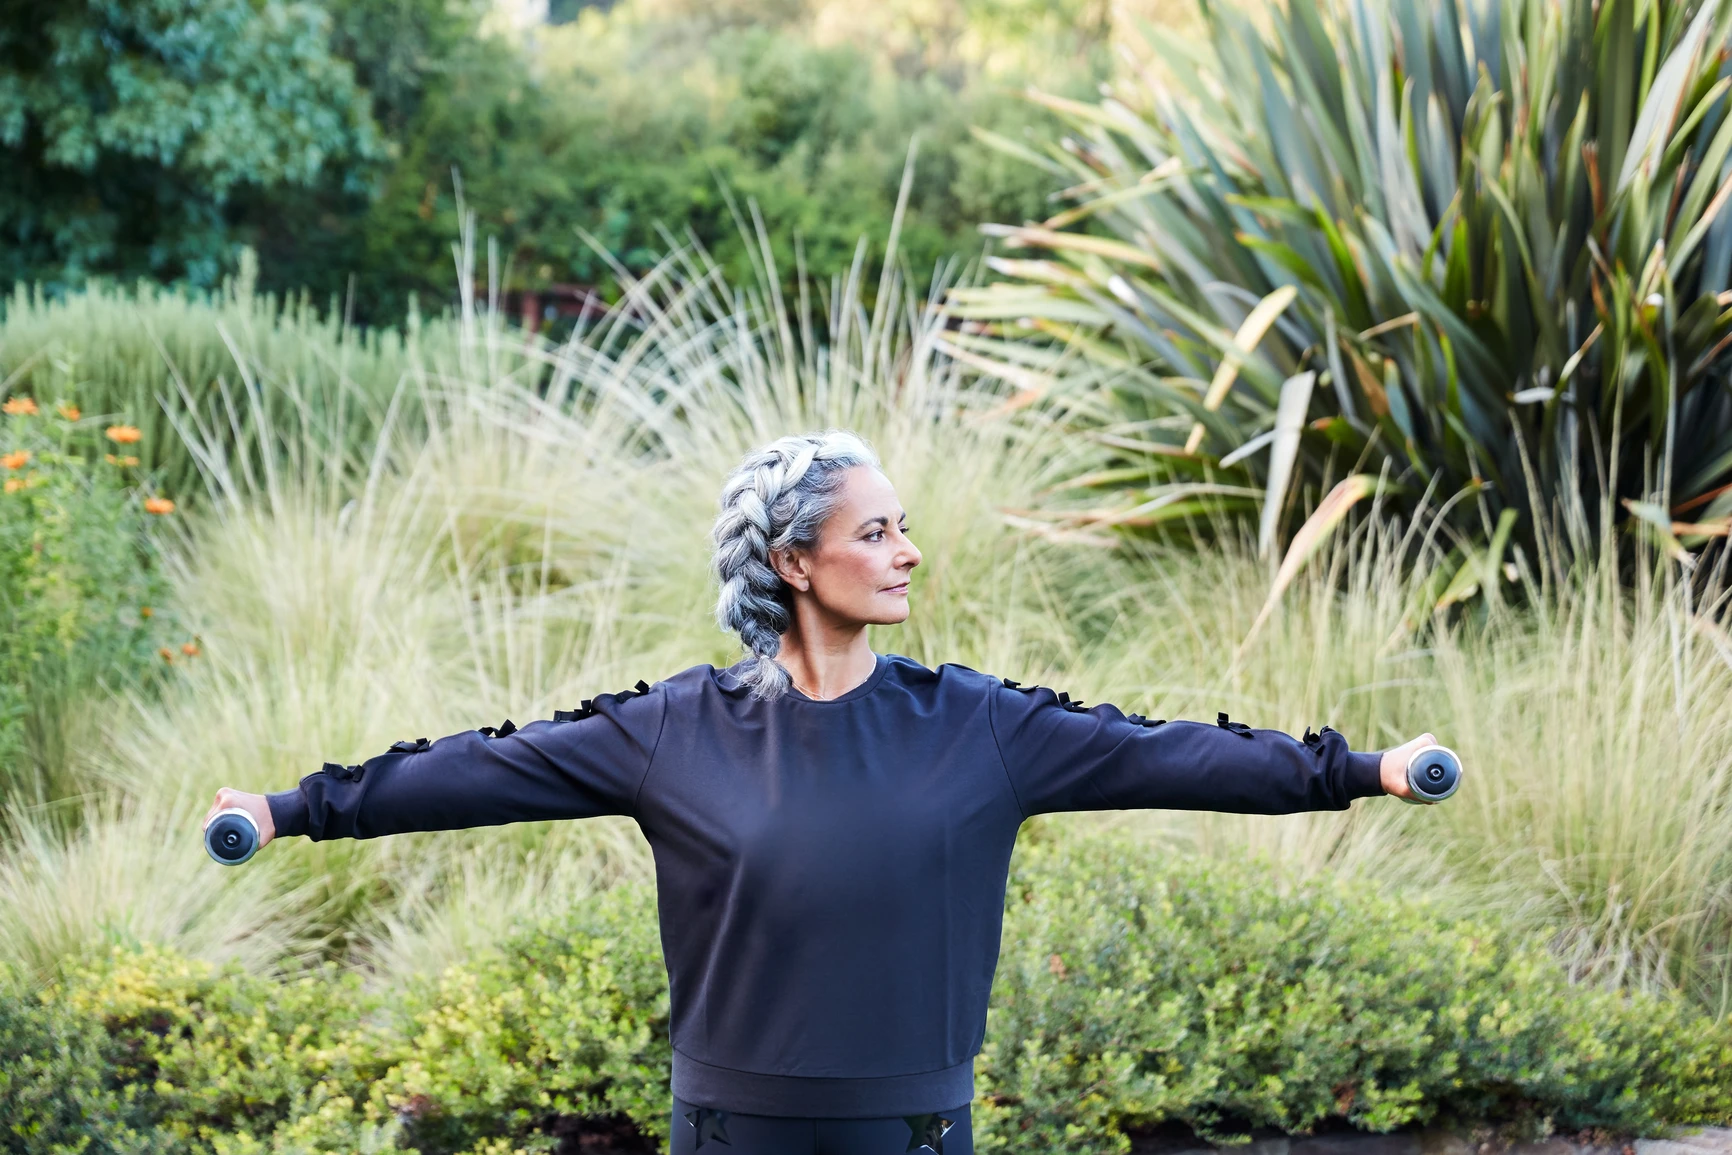 Woman with a thick grey hair in french braid lifting weight in lush Mediterranean garden. AW151 